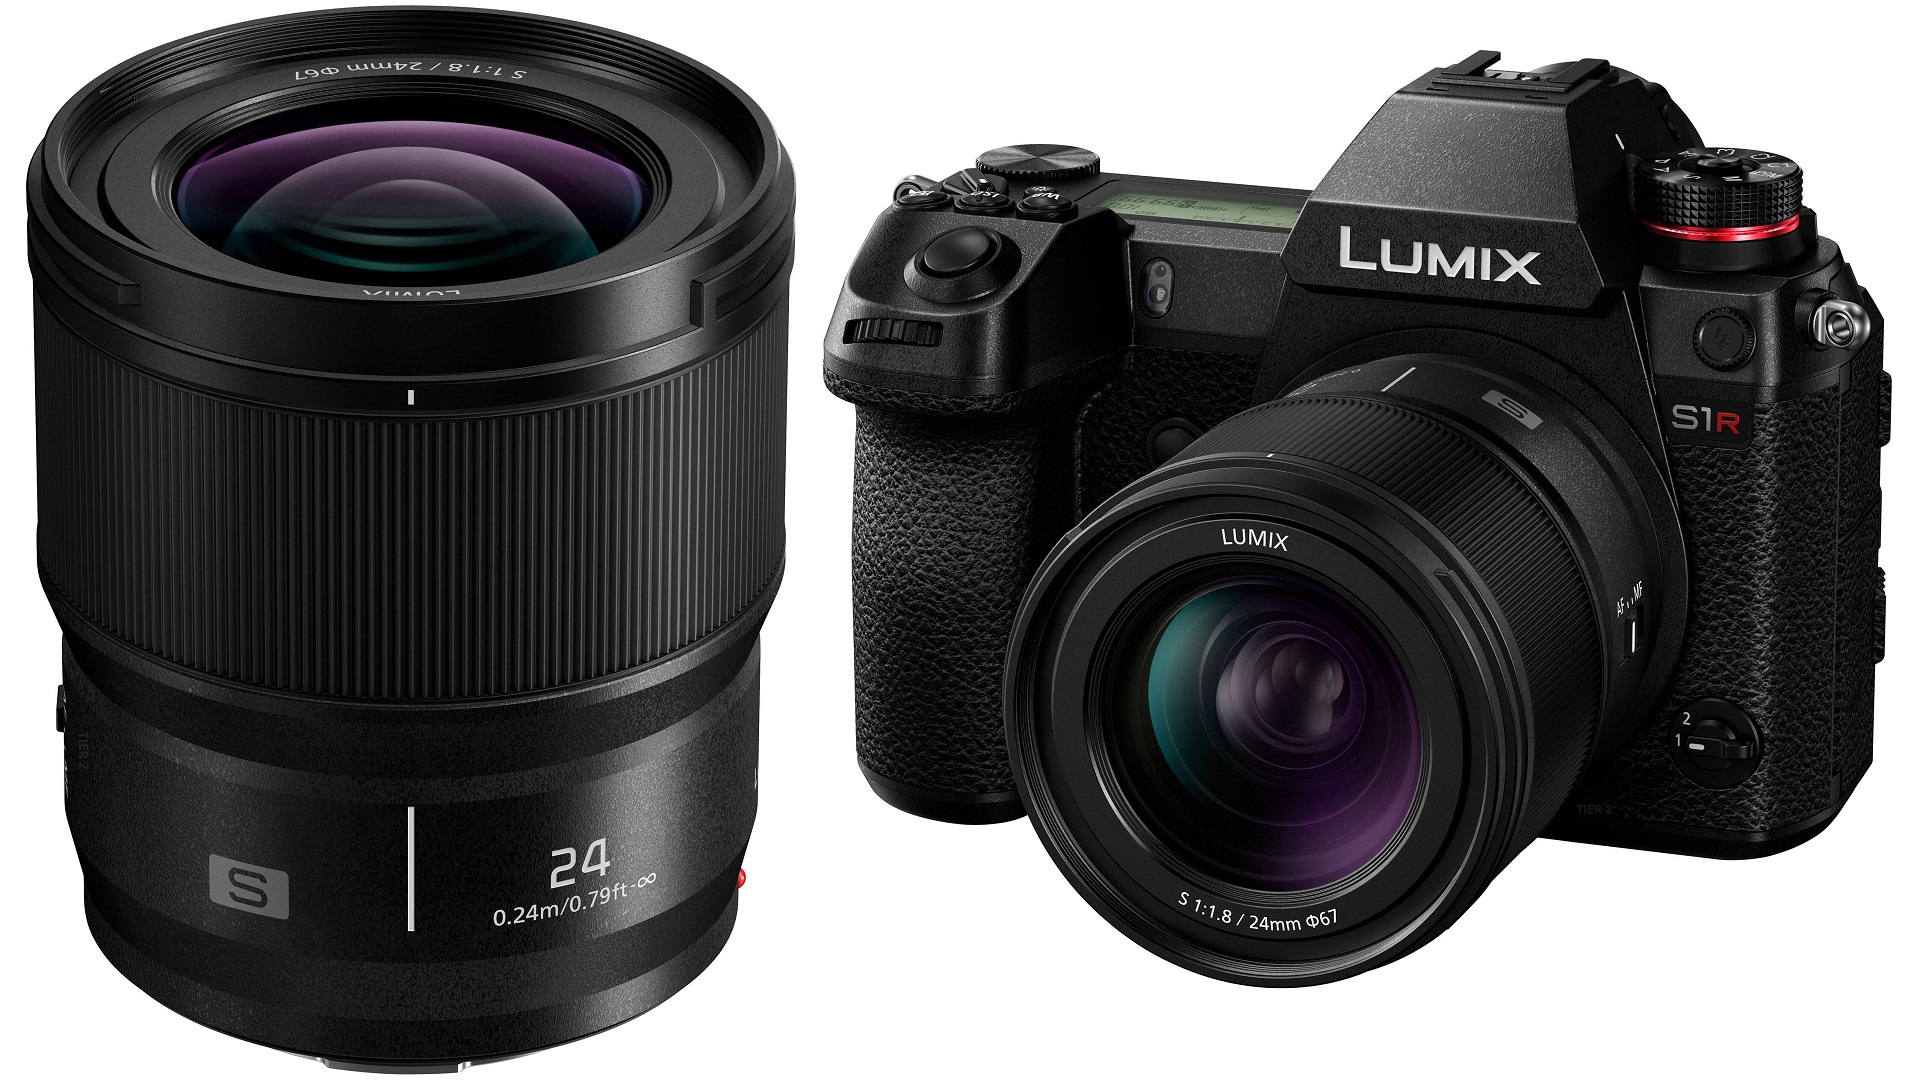 Panasonic LUMIX S 24mm f/1.8 Lens Launched | CineD